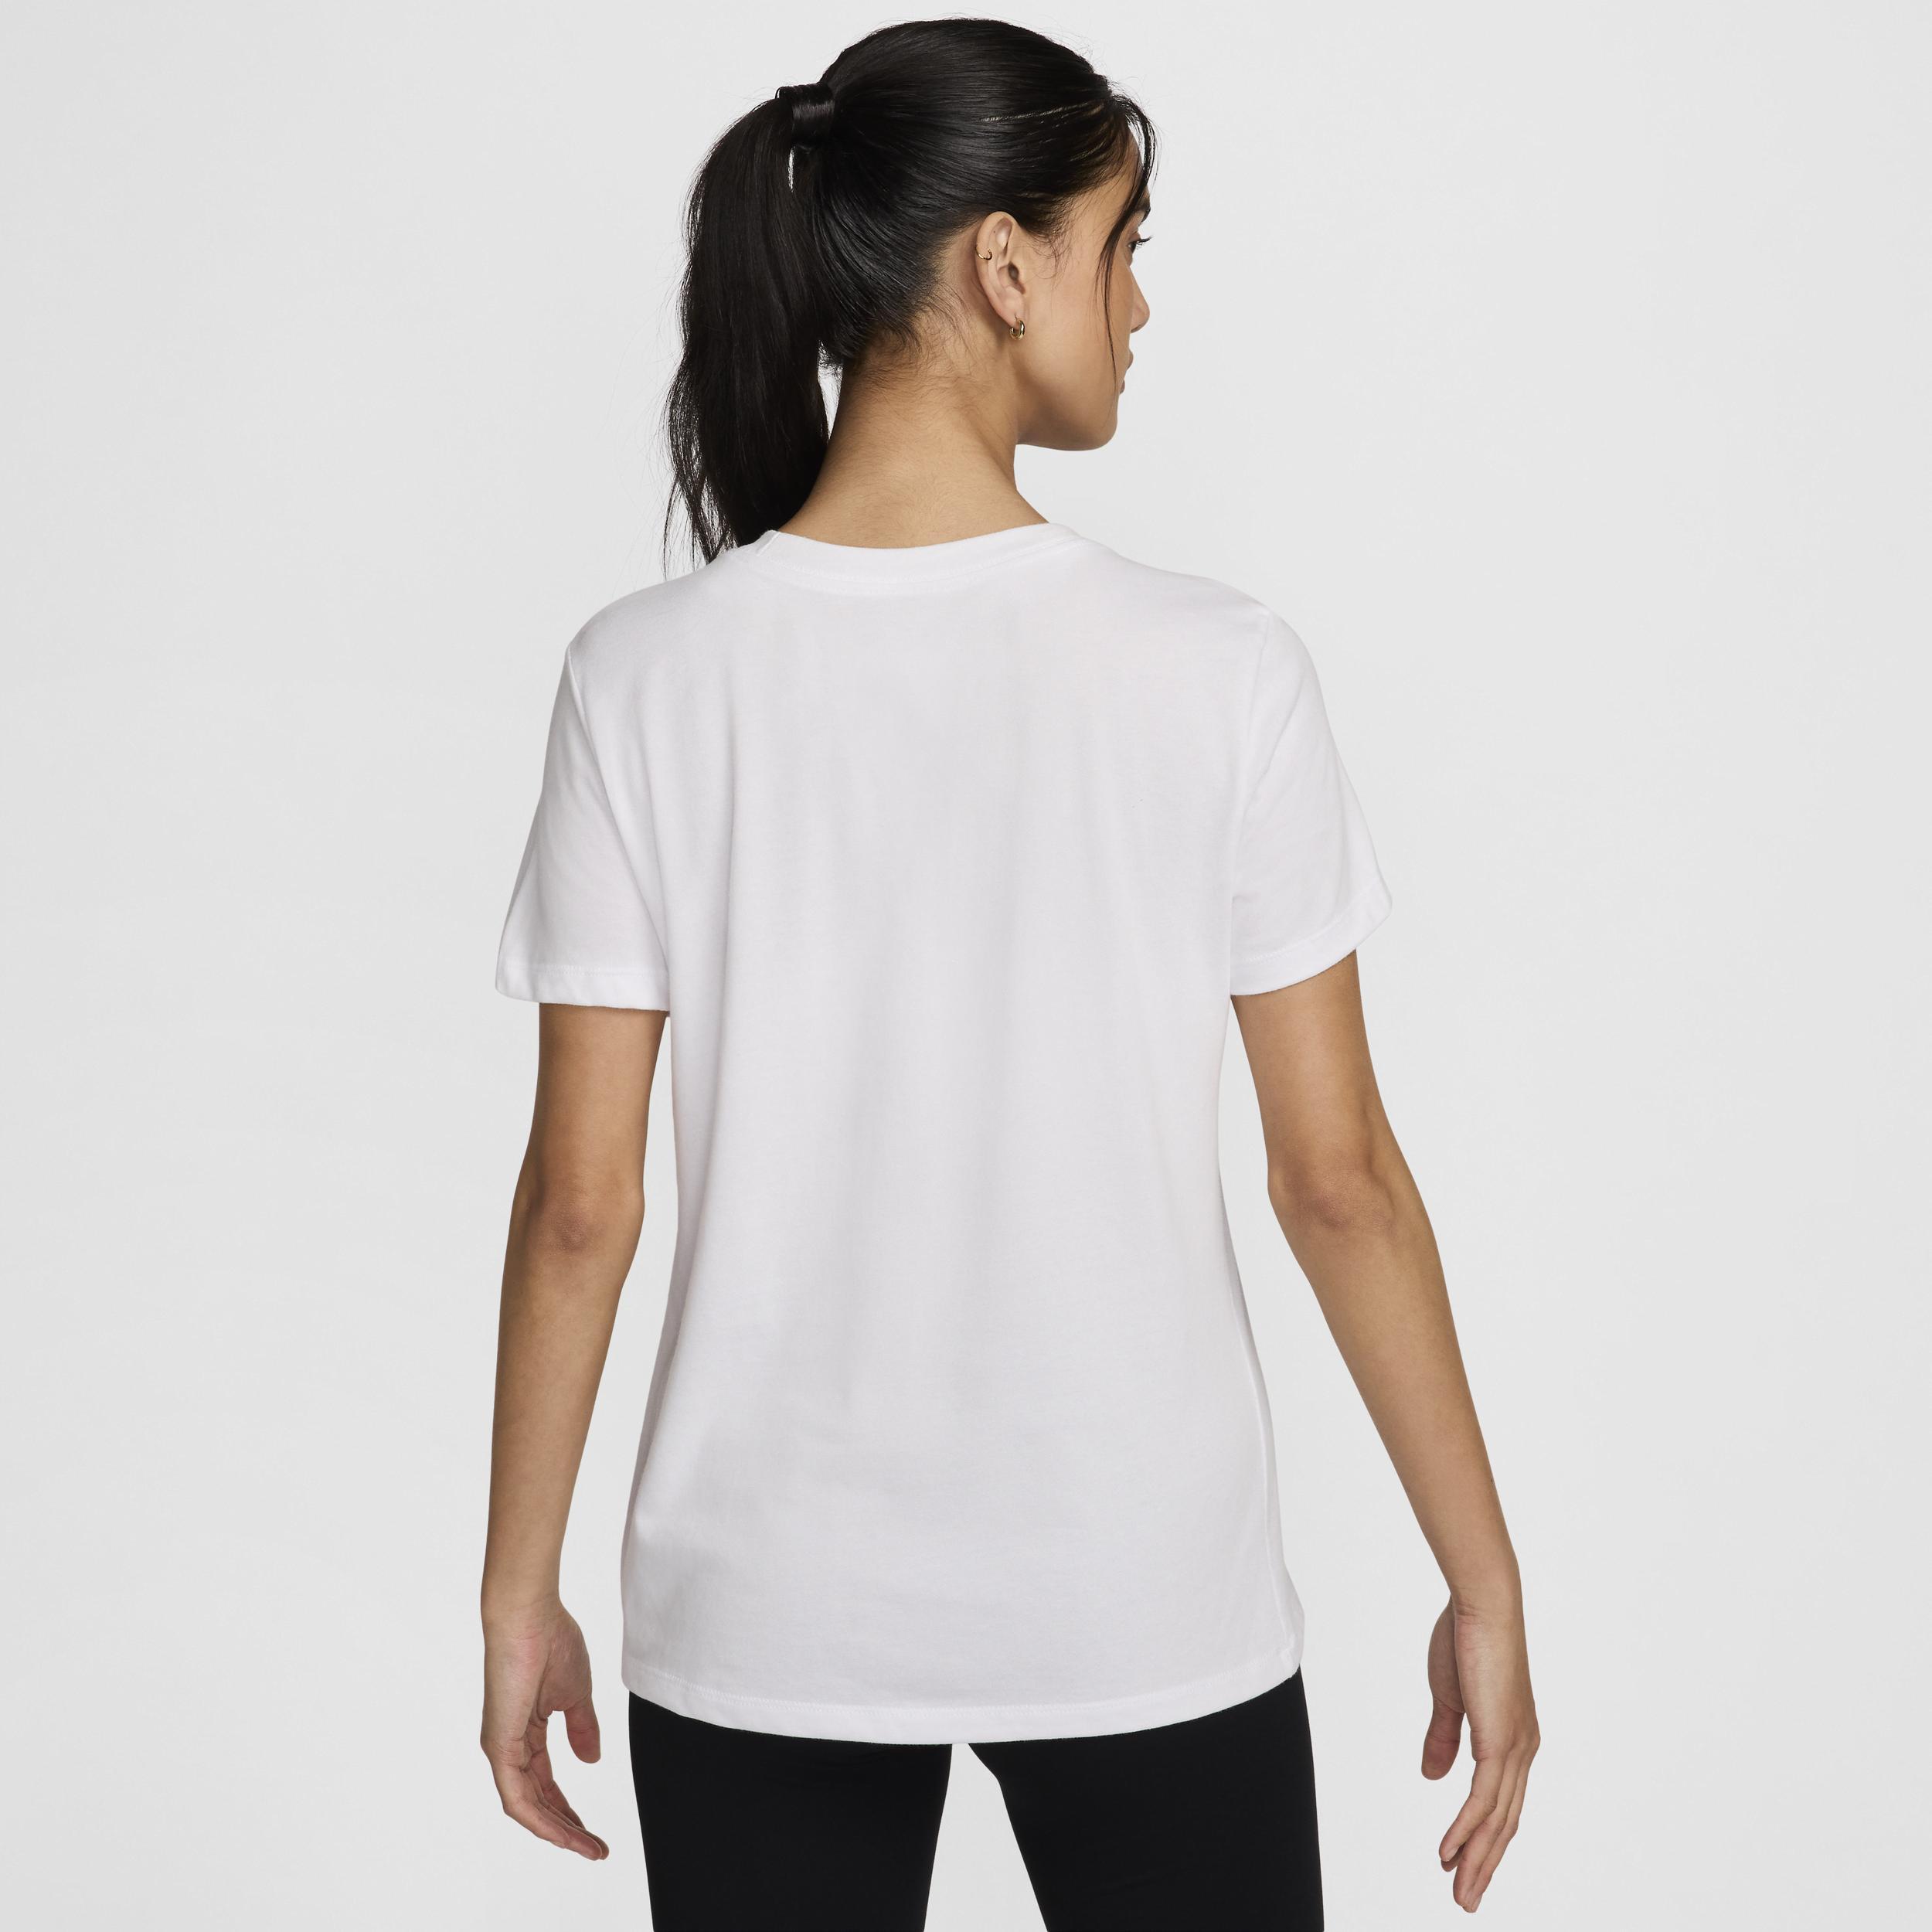 Nike Womens Weightlifting T-Shirt Product Image